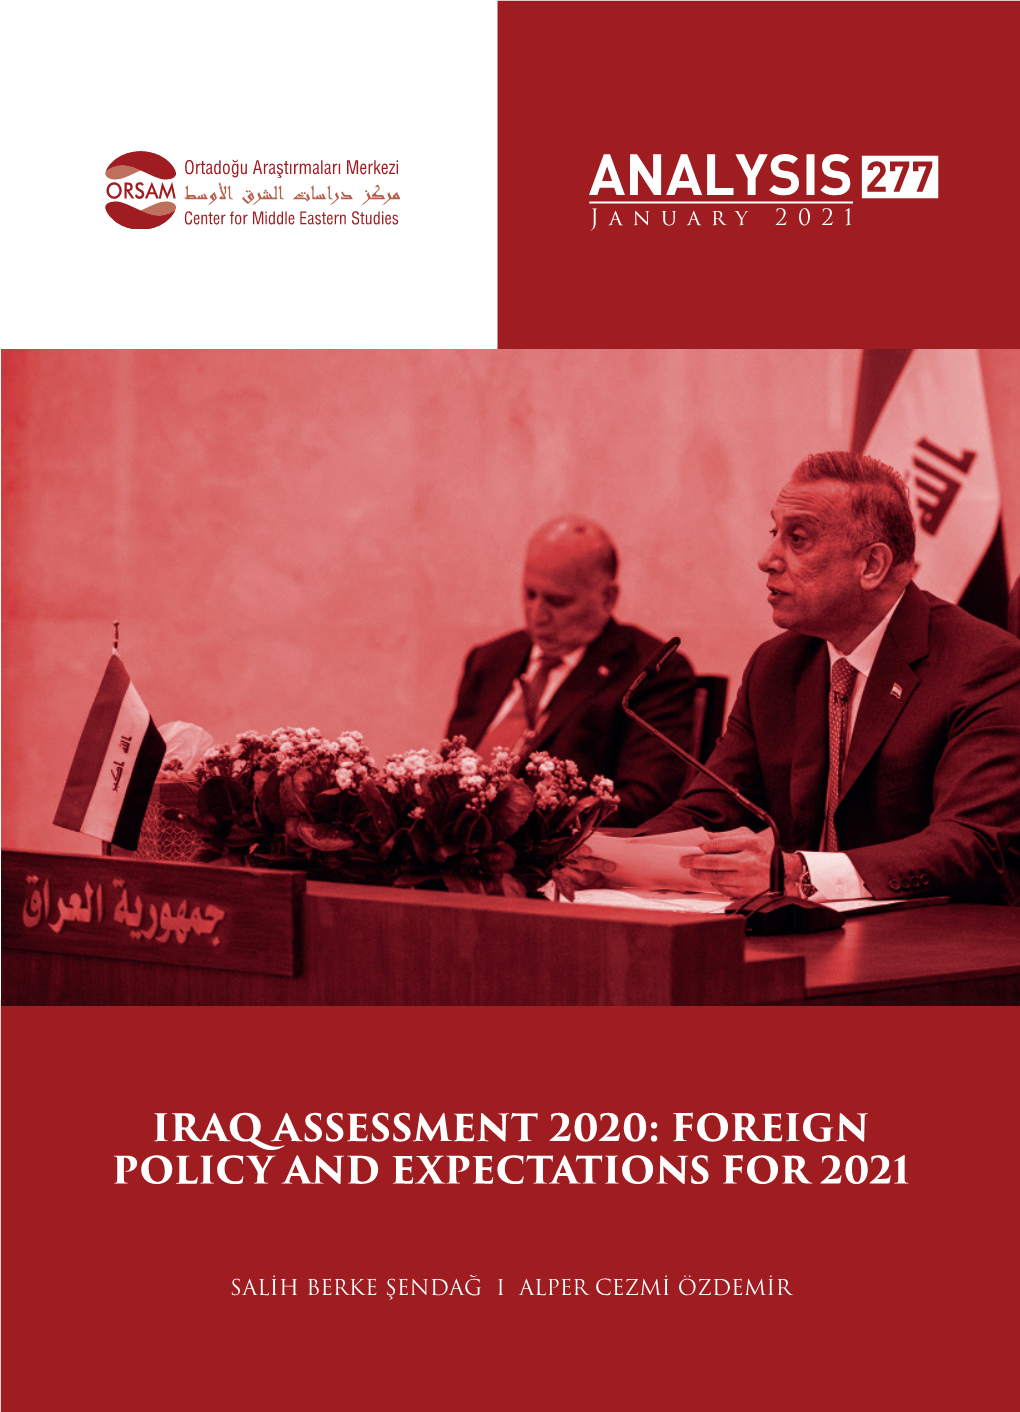 Iraq Assessment 2020: Foreign Policy and Expectations for 2021